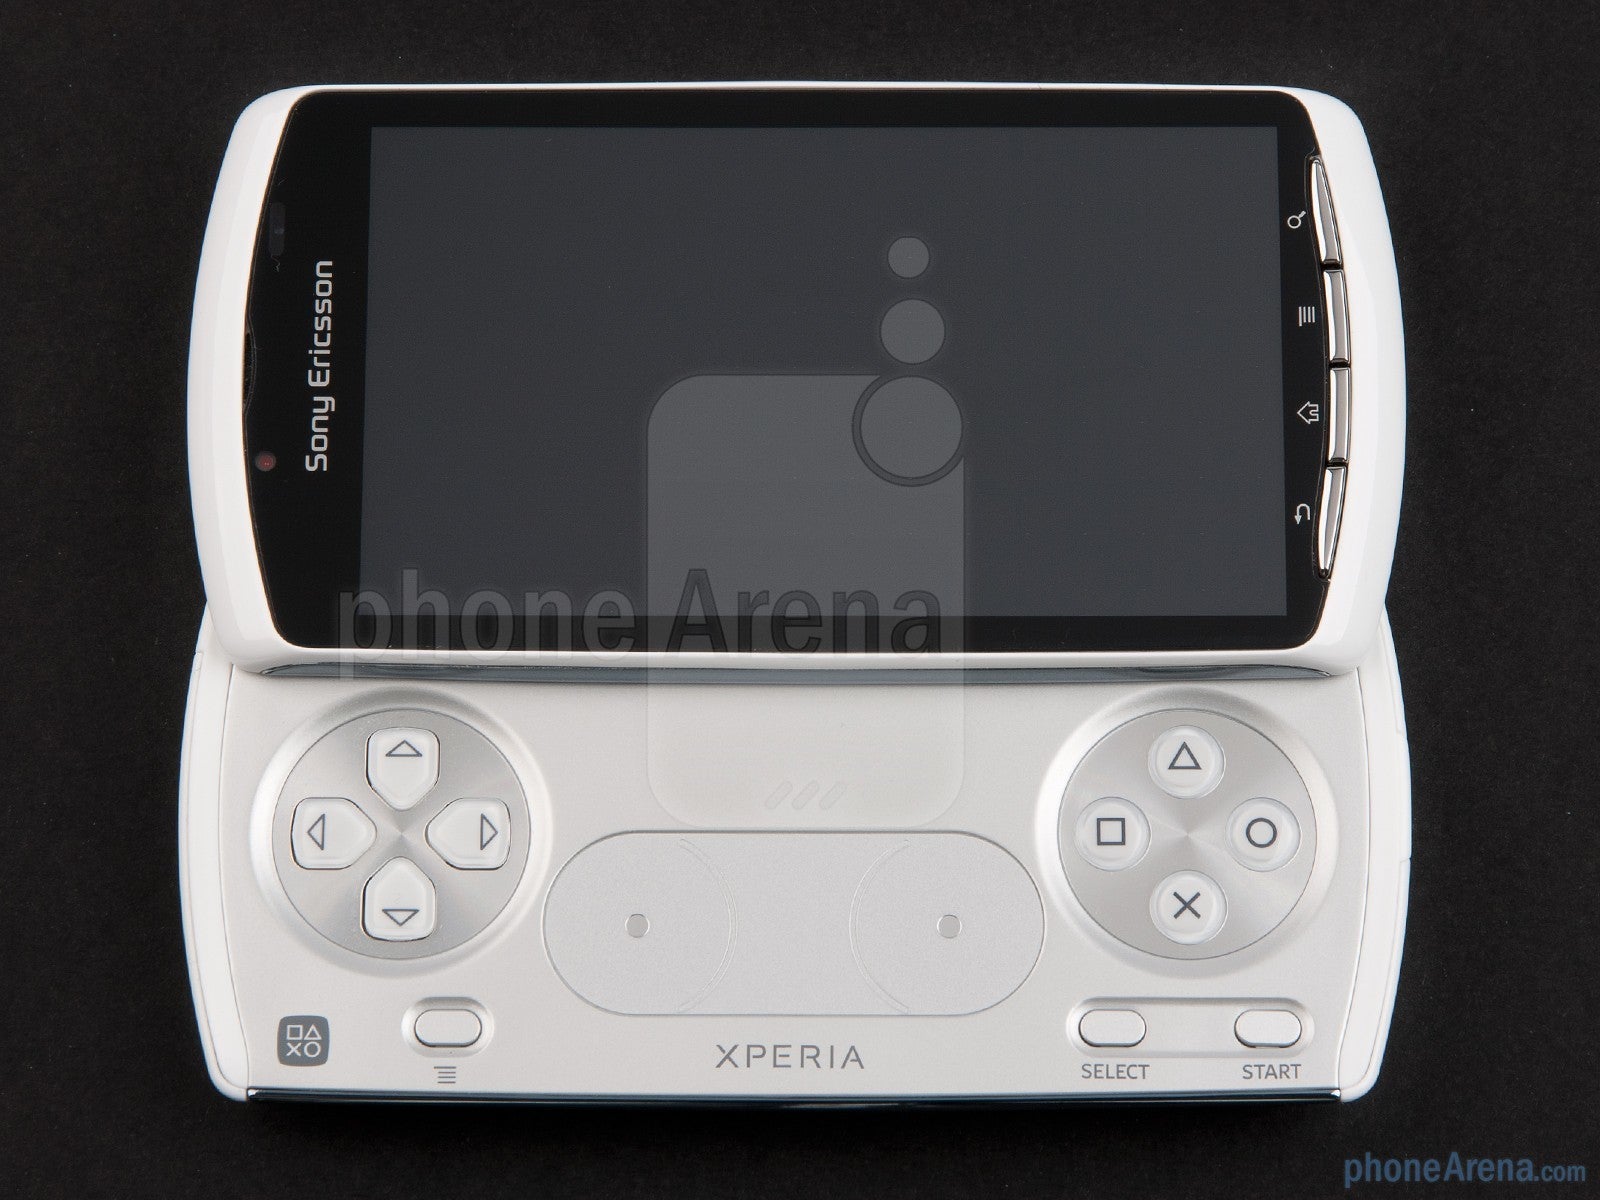 The Sony Ericsson Xperia PLAY, aka the PlayStation phone, was highly anticipated prior to its announcement. But as we've seen, a phone really doesn't need integrated controls to be considered a gaming phone. - Cool concepts that started out intriguing but never took off